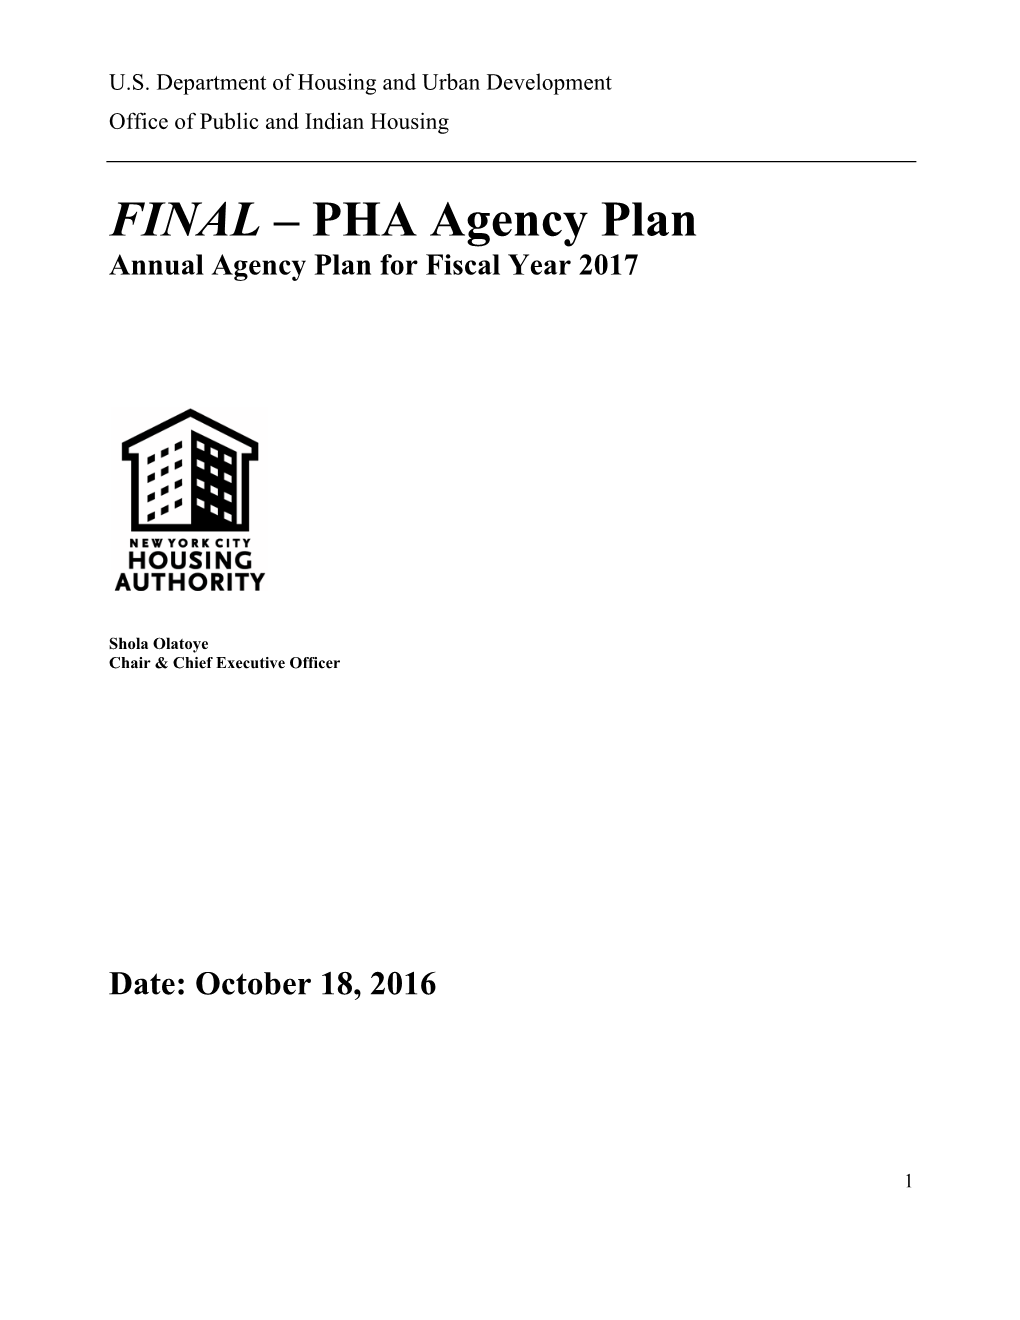 FINAL – PHA Agency Plan Annual Agency Plan for Fiscal Year 2017